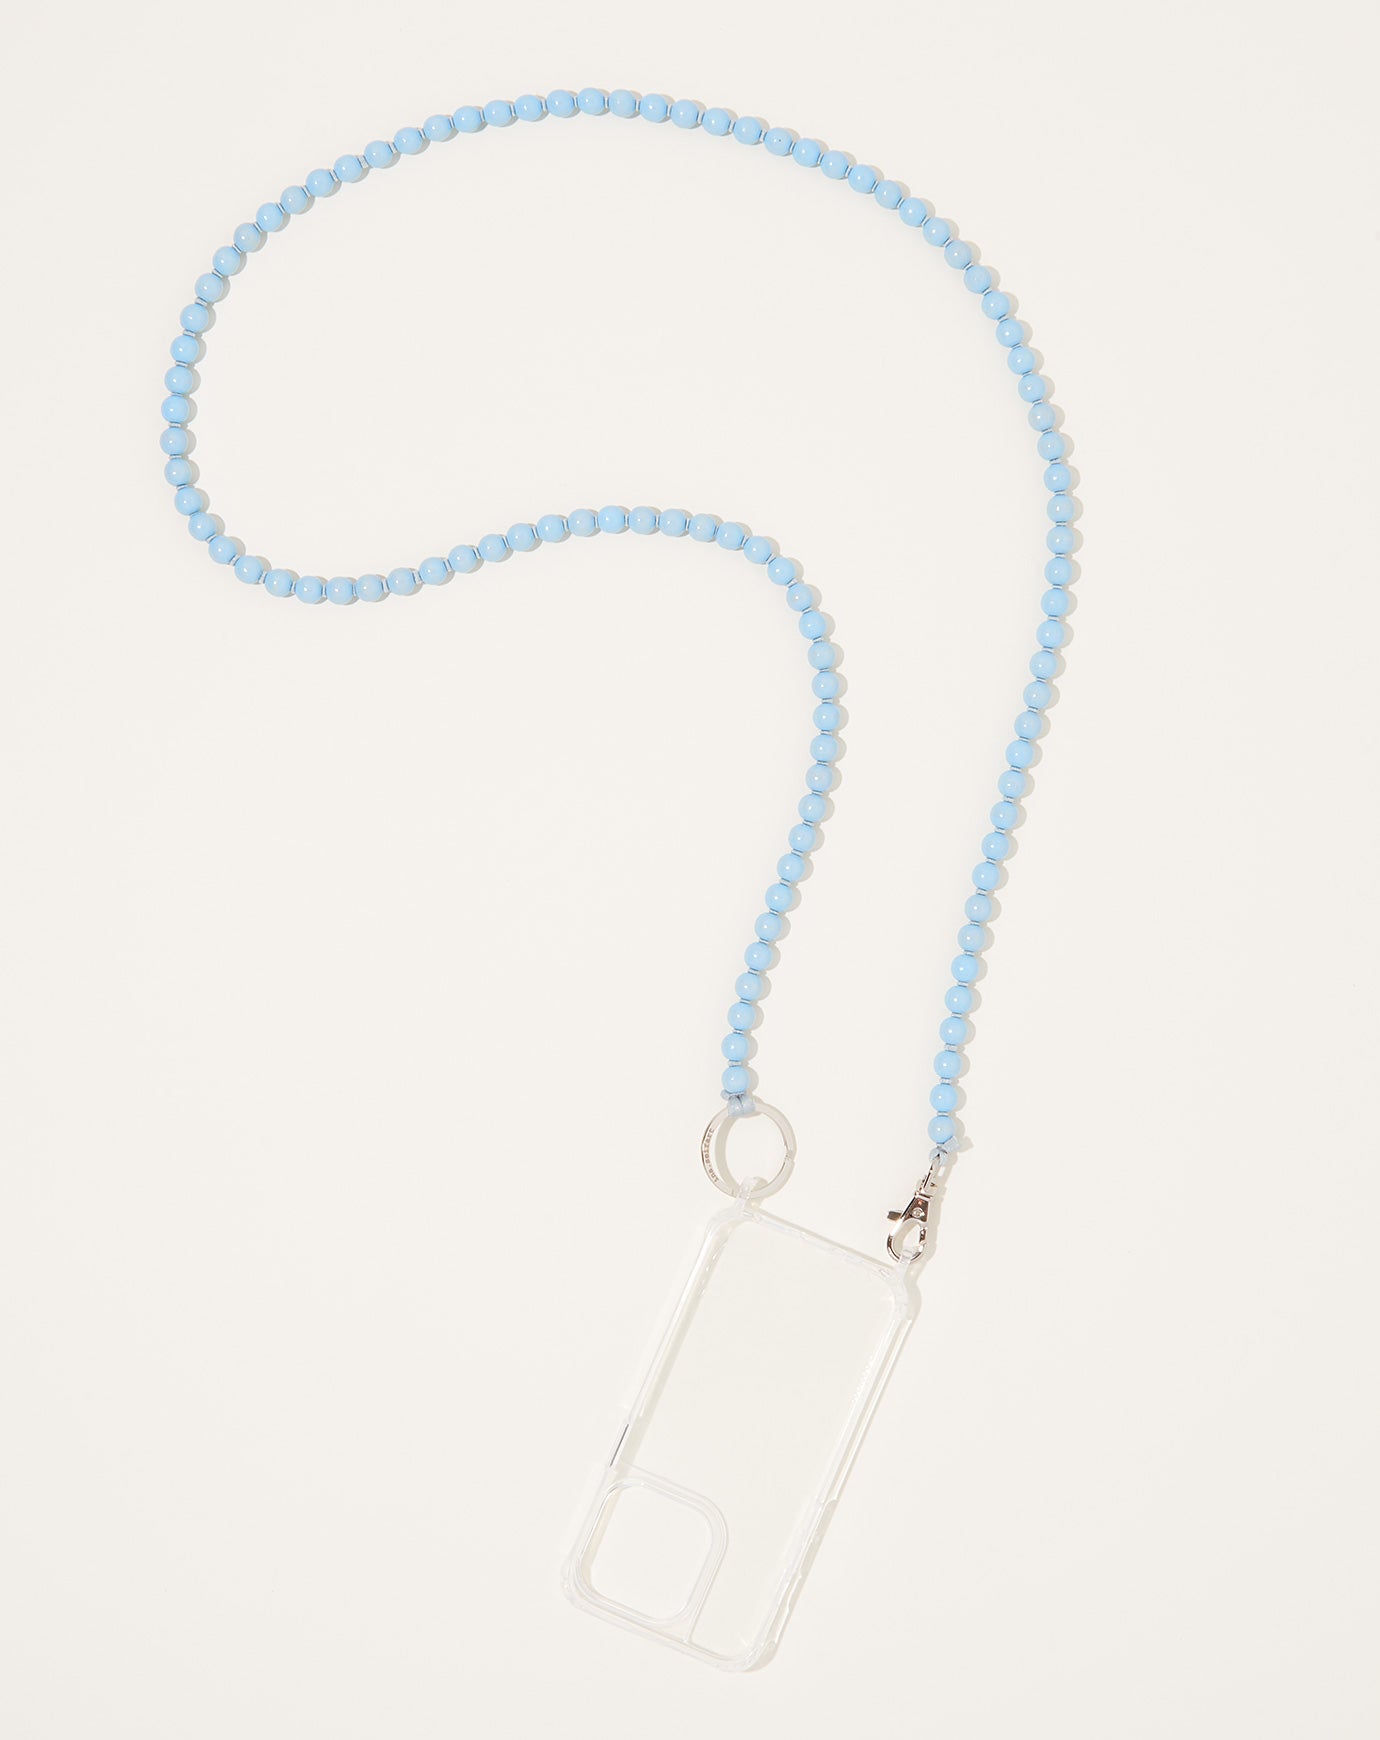 Ina Seifart Handykette iPhone Necklace in Pastel Blue on Light Grey